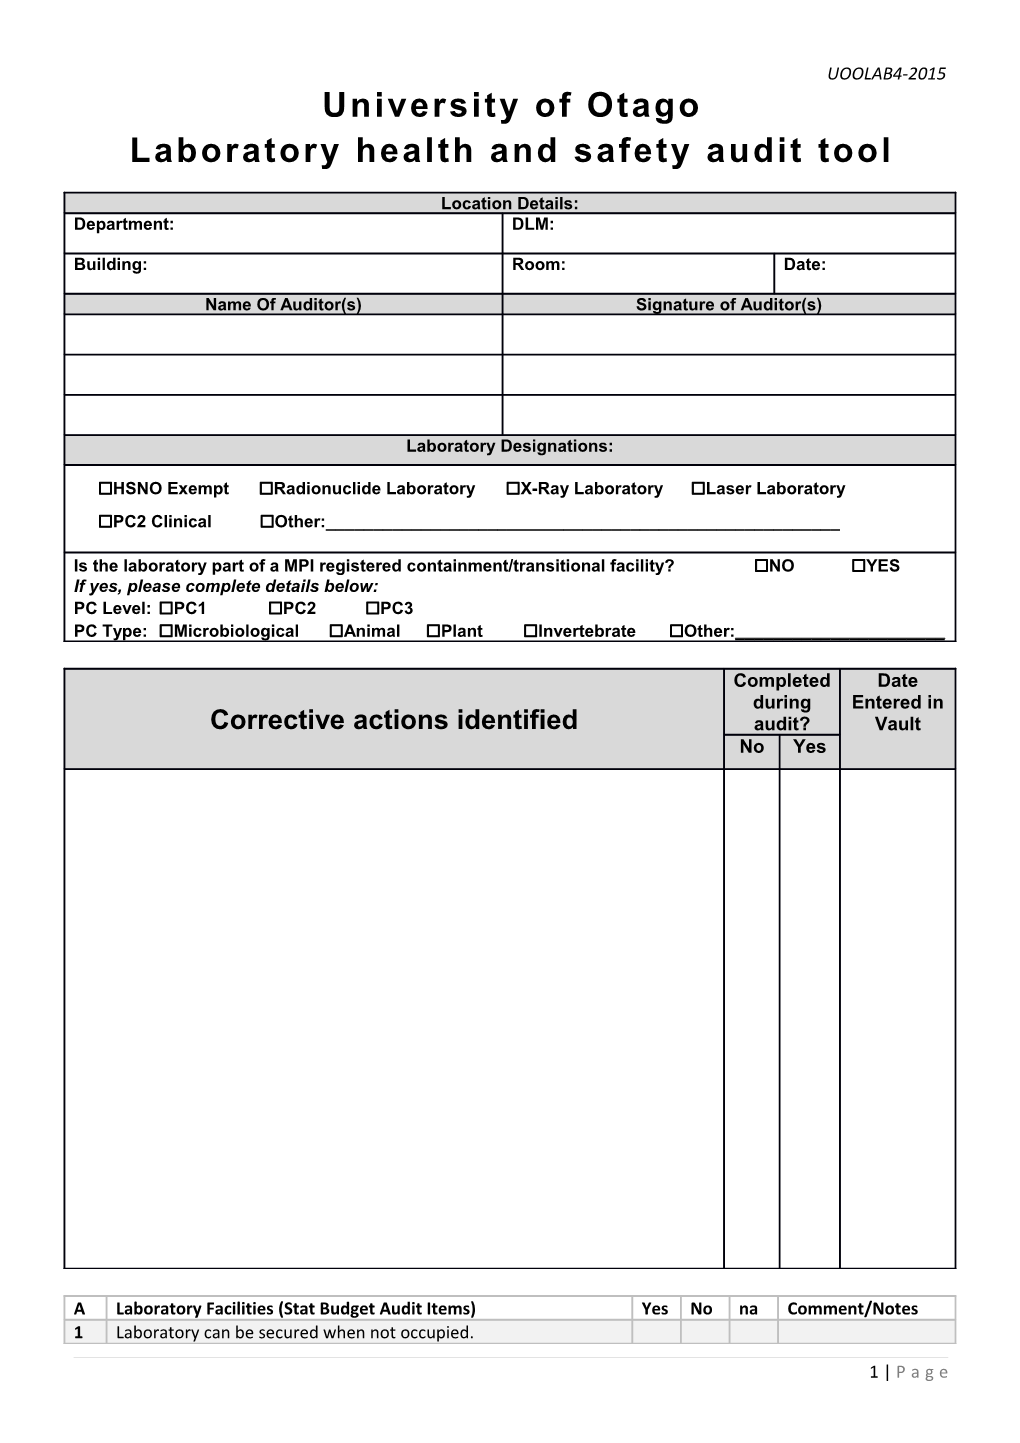 Laboratory Health and Safety Audit Tool